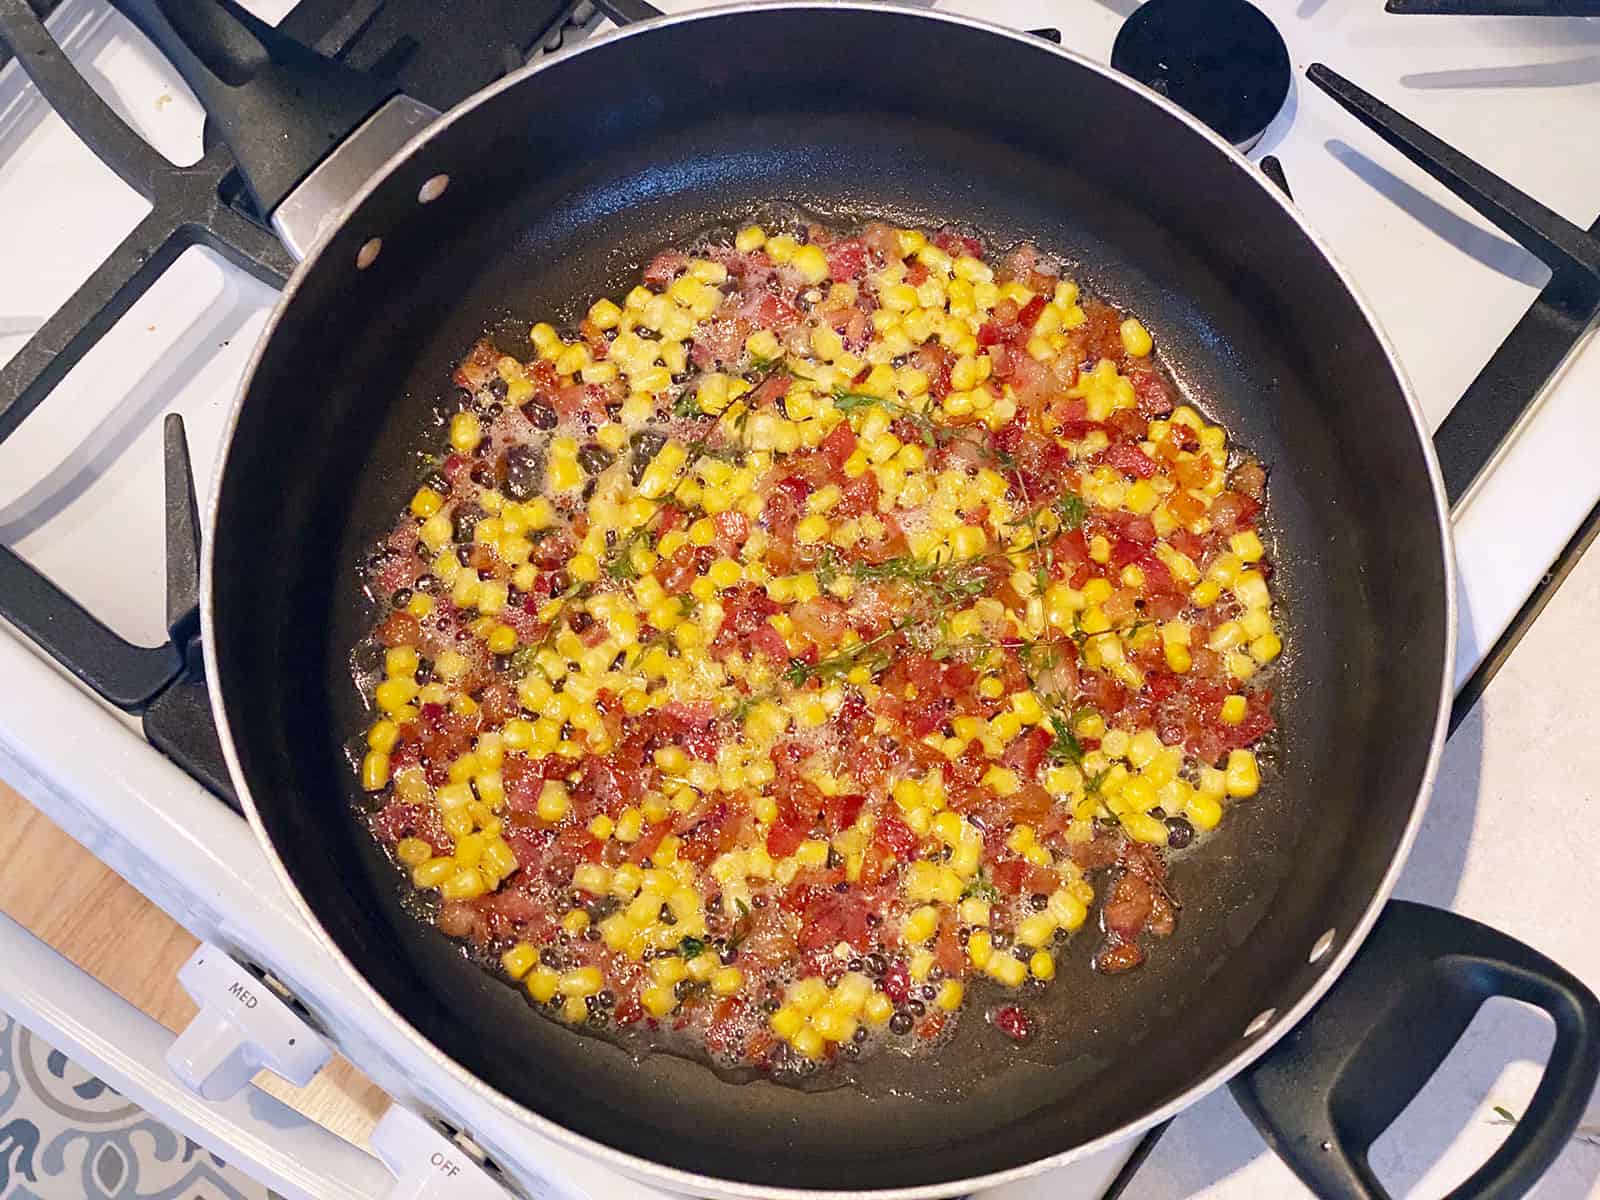 Bacon, corn, and thyme cooking in a pan